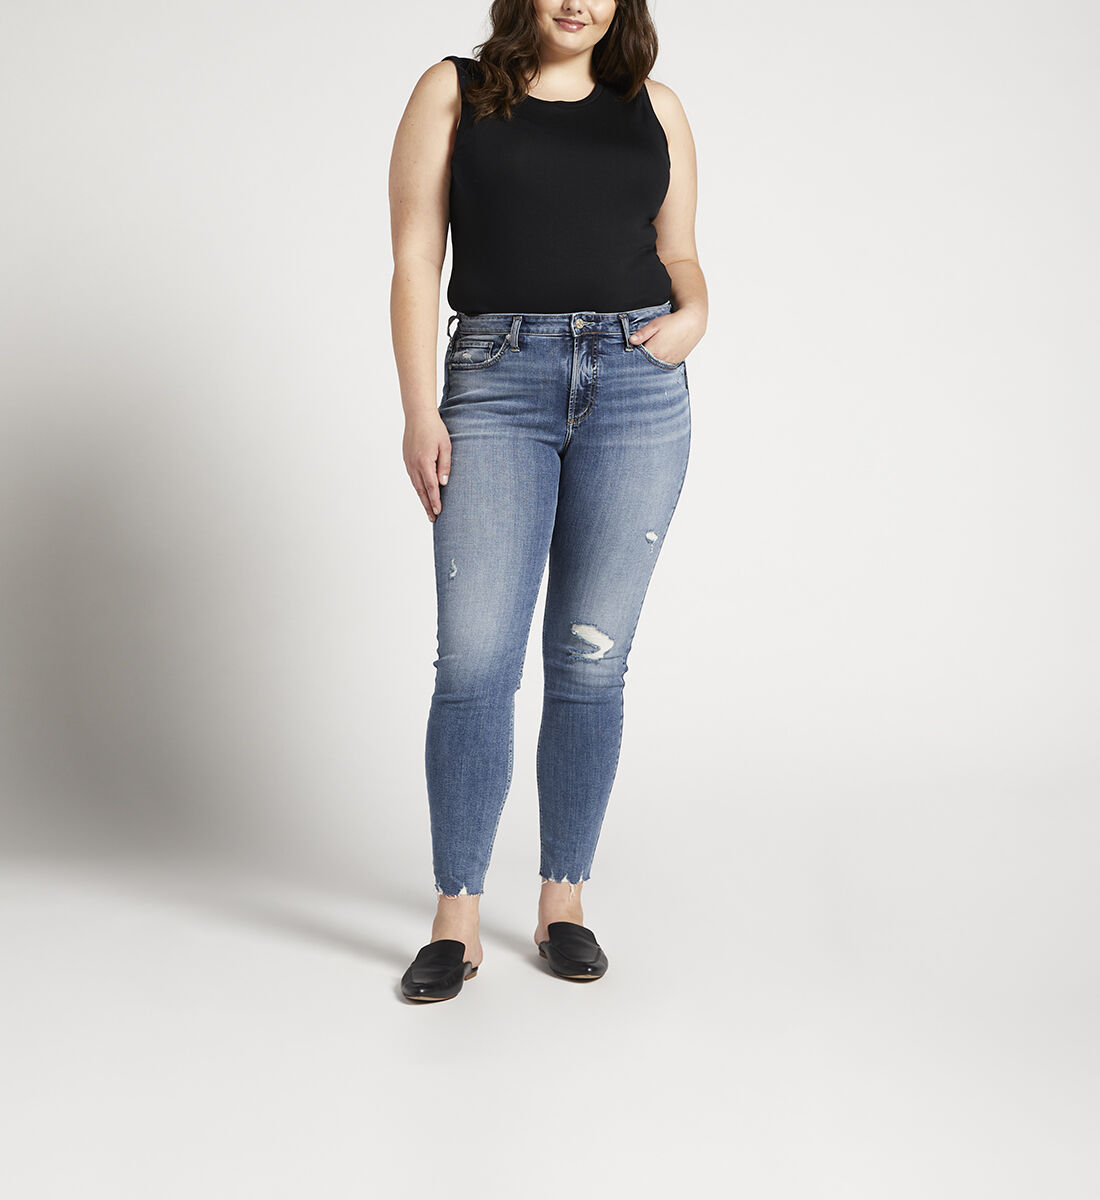 Most Wanted Mid Rise Skinny Jeans Plus Size Front